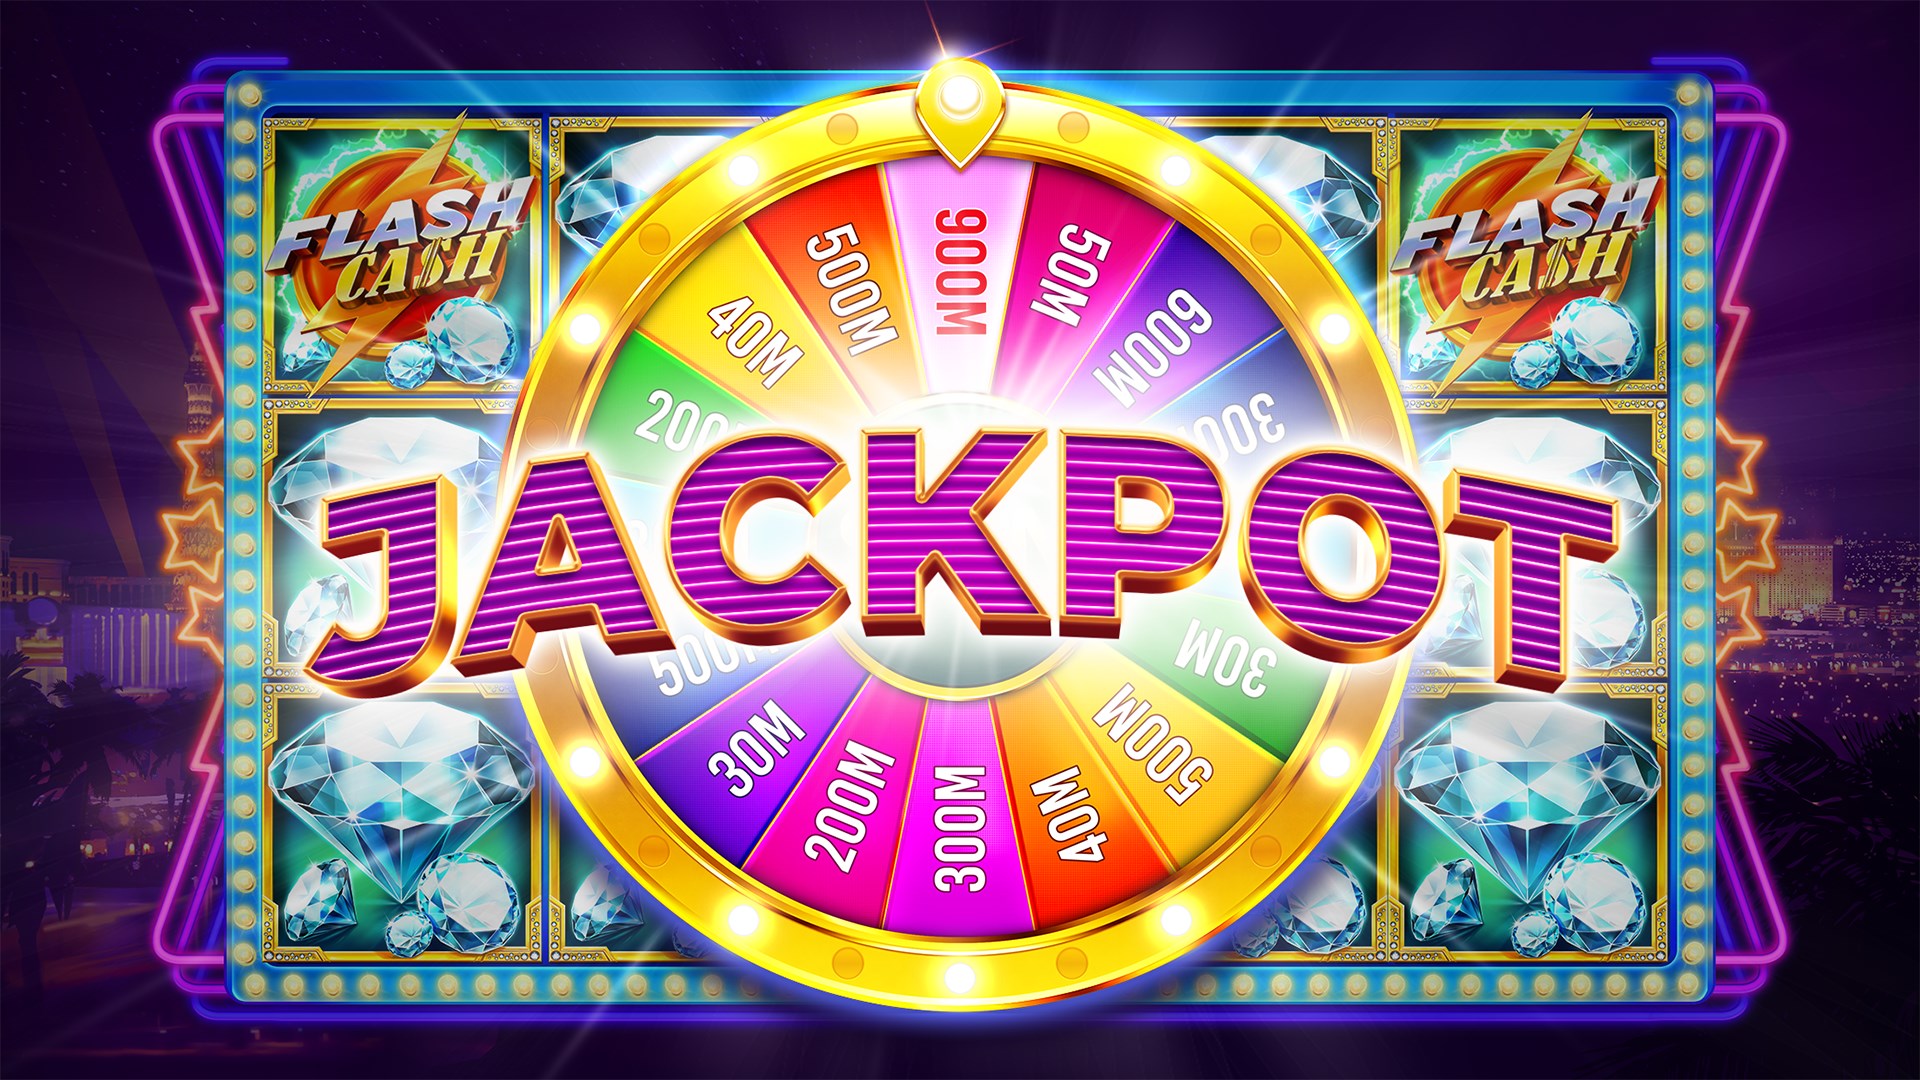 Multiplayer Slots – Compete On Each Spin For a Jackpot!